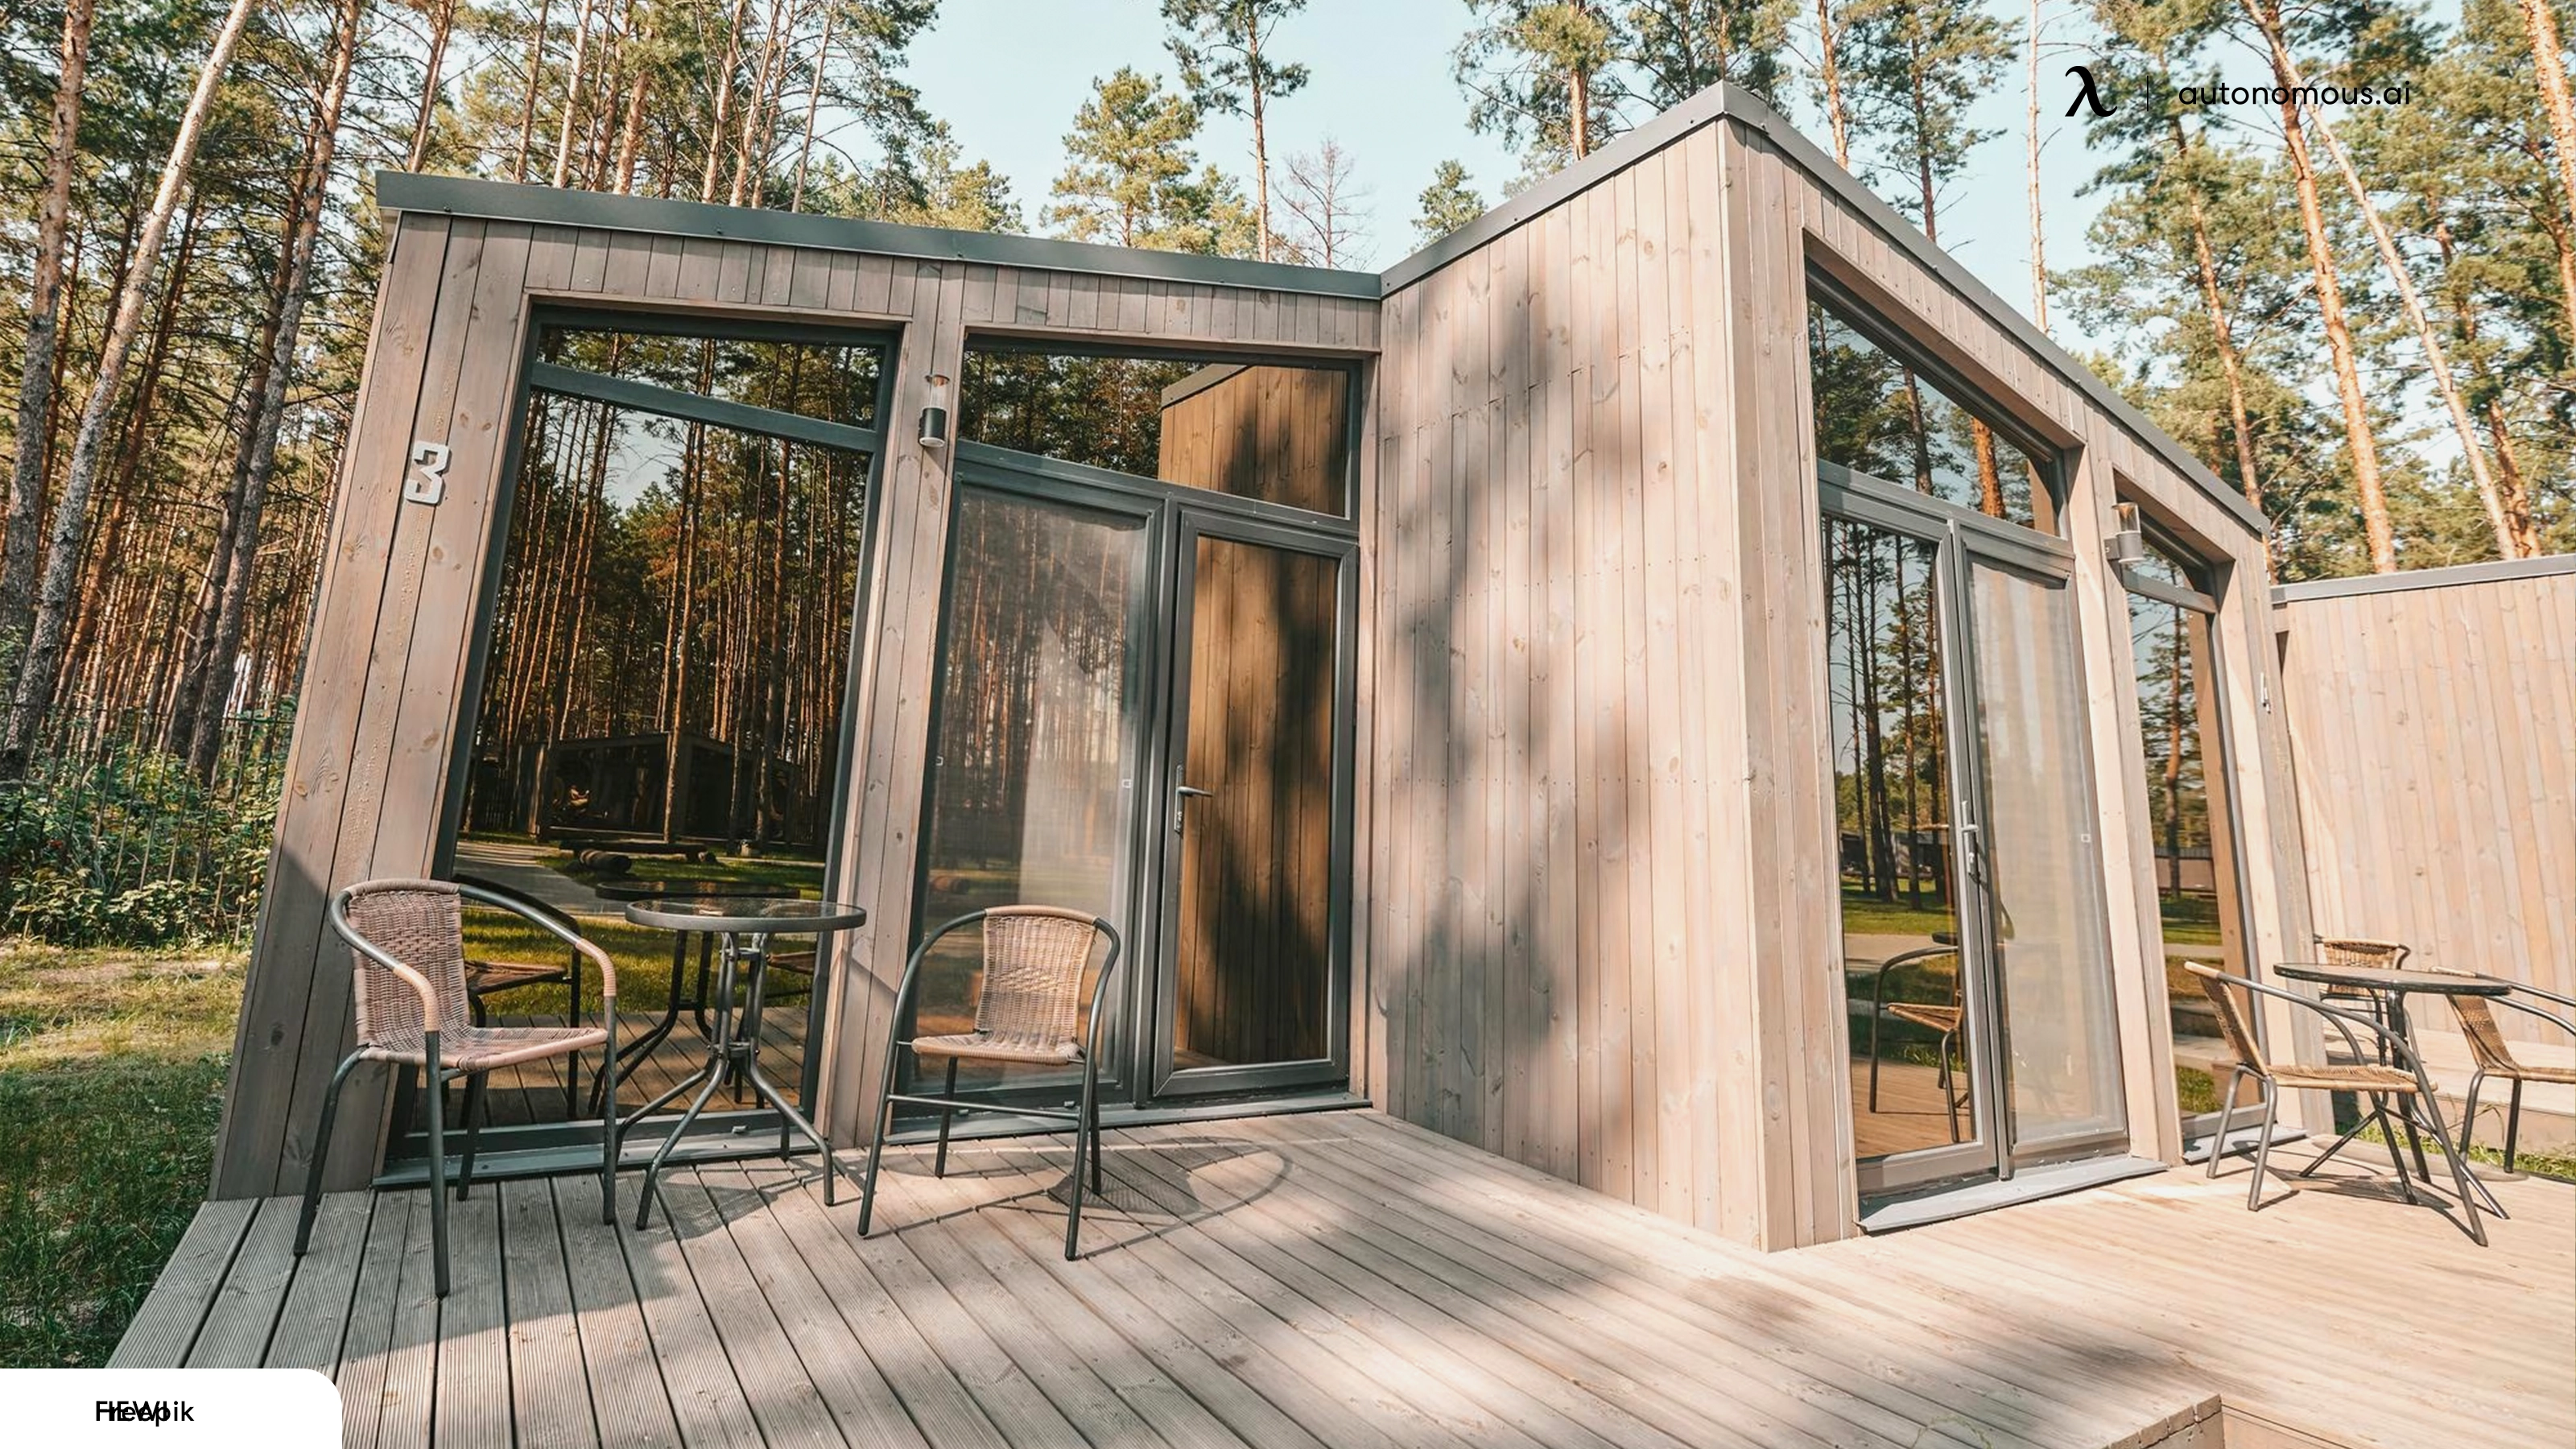 Can I Build My Own Modular Home Anywhere?